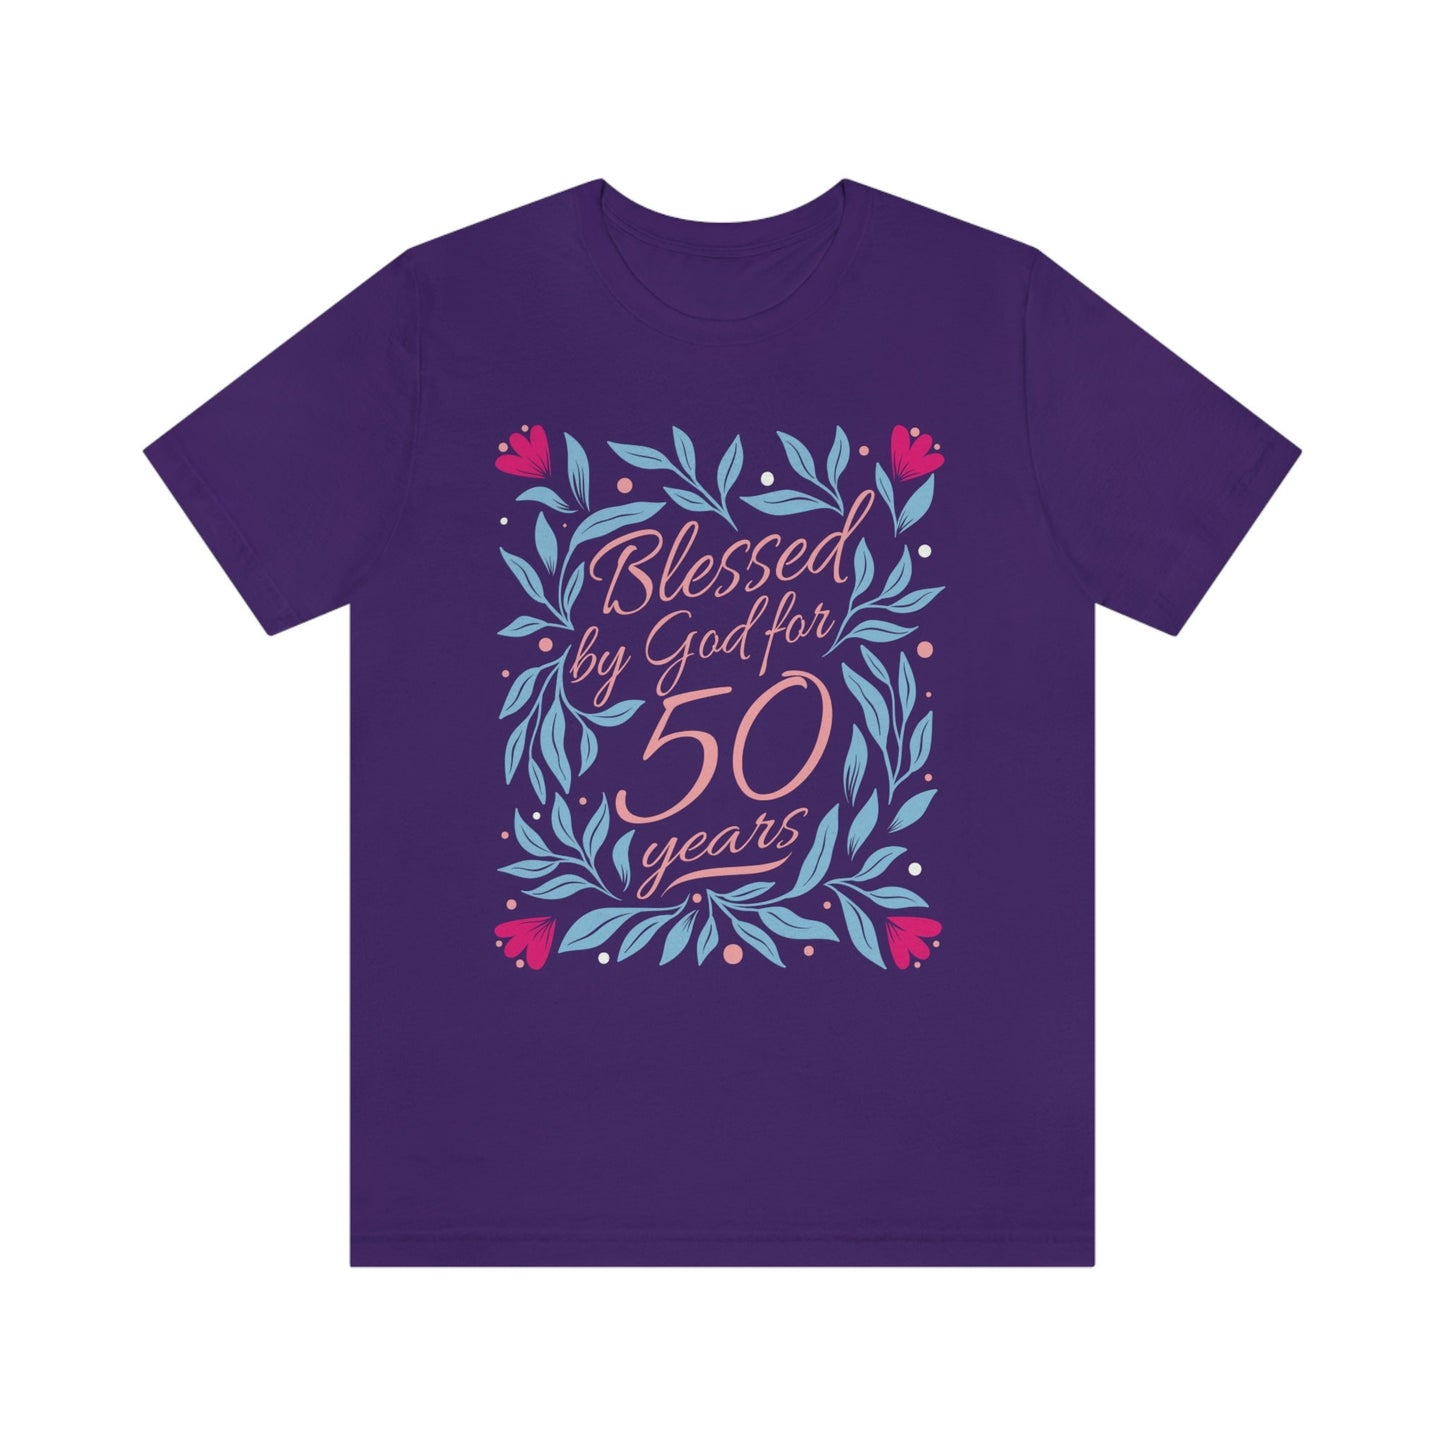 Blessed by God for 50 years gift t-shirt for women or wife